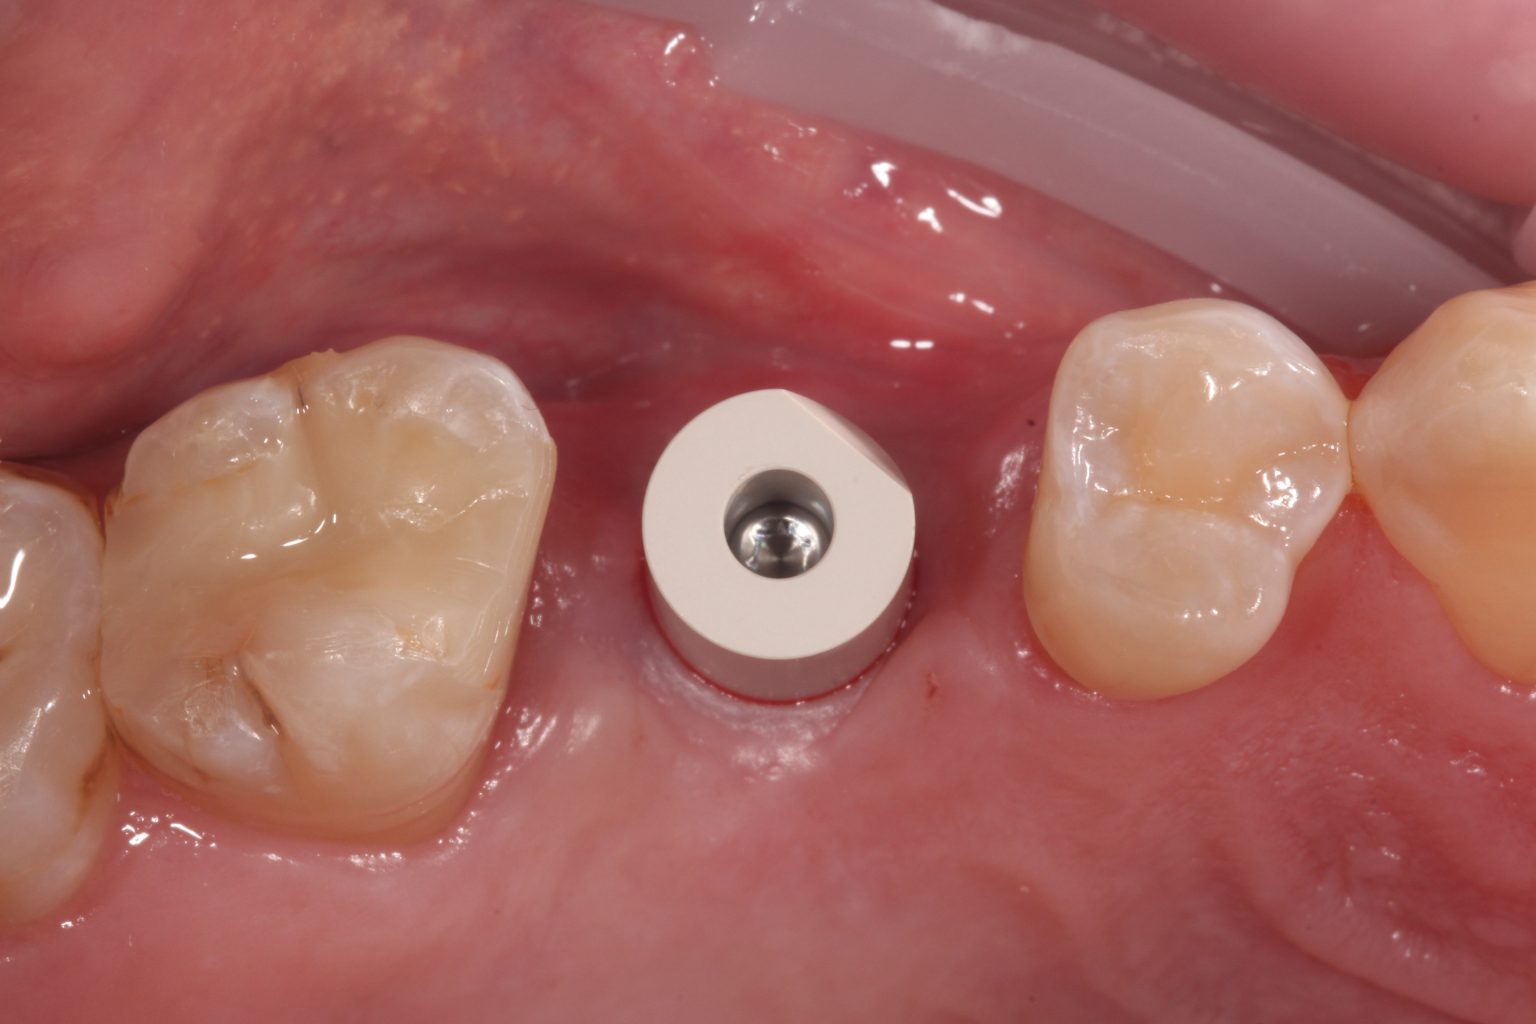 Fig. 8: The Straumann Mono Scanbody is attached in preparation for the digital intraoral scan